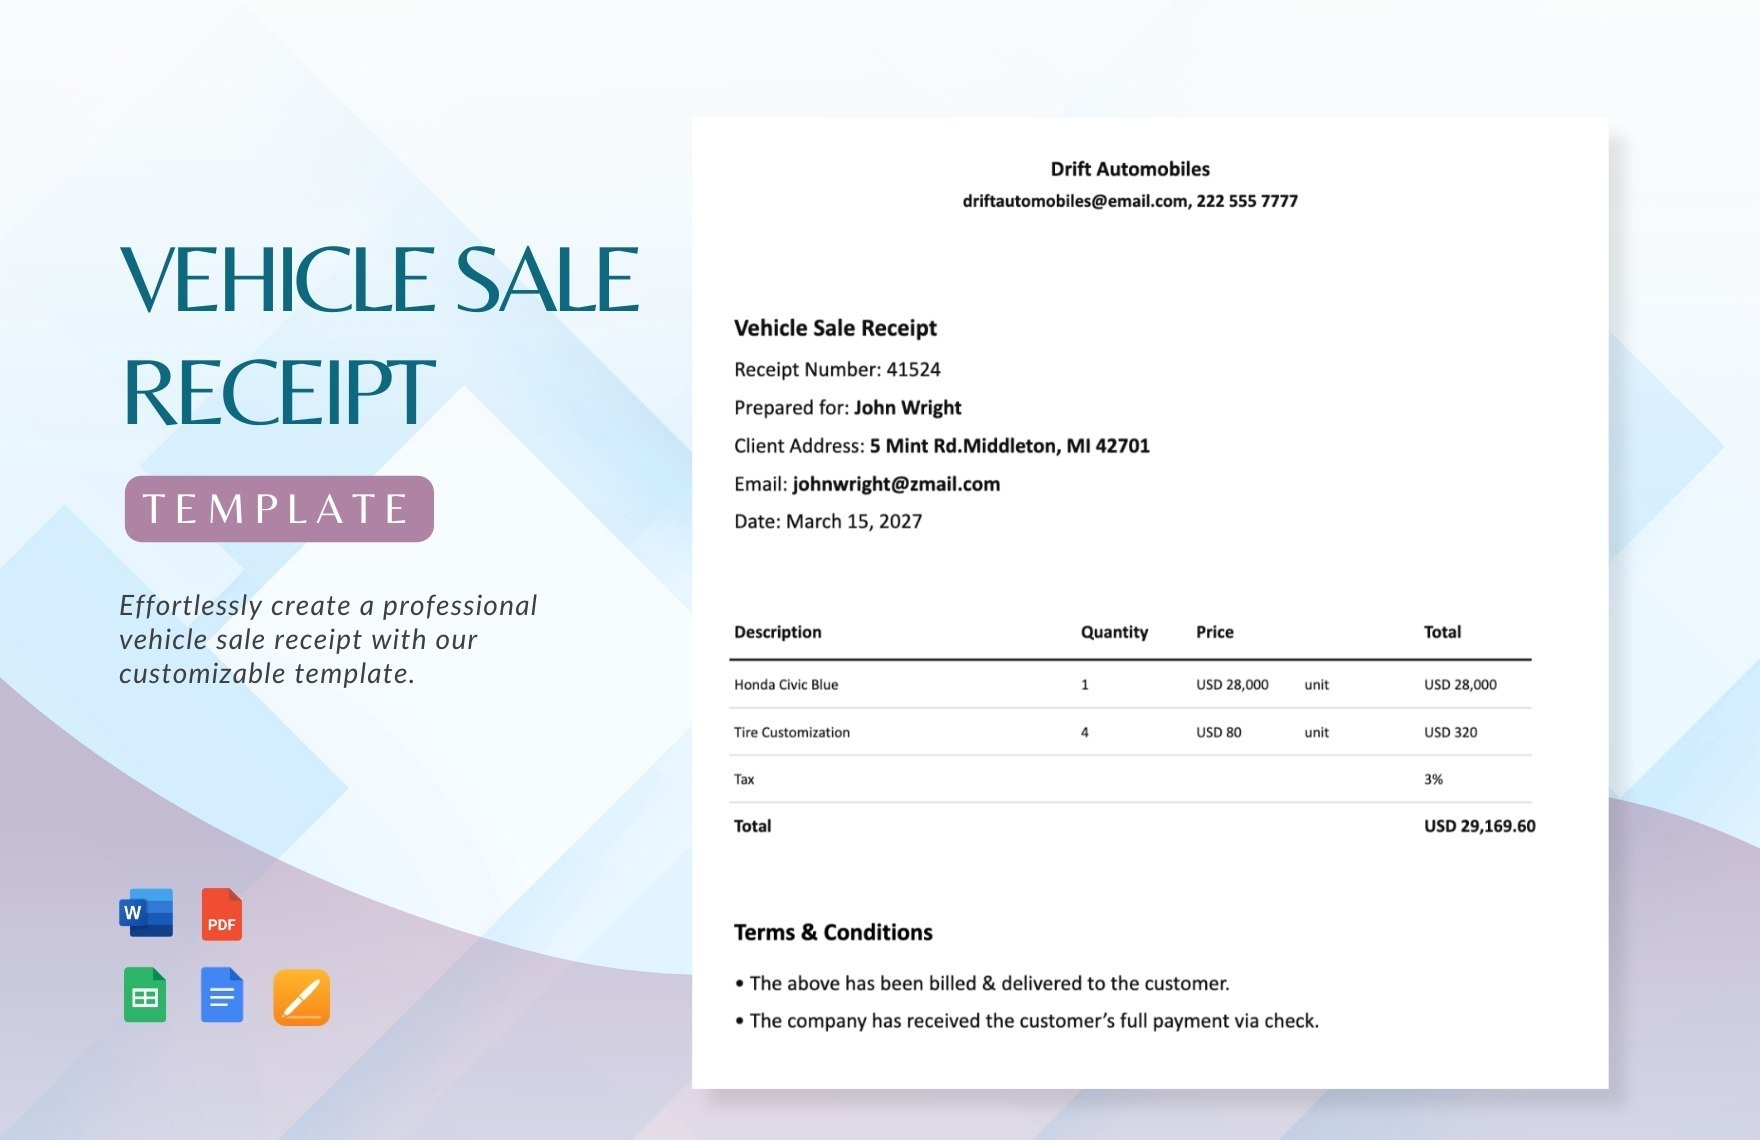 Vehicle Sale Receipt Template in Word, Google Docs, PDF, Google Sheets, Apple Pages